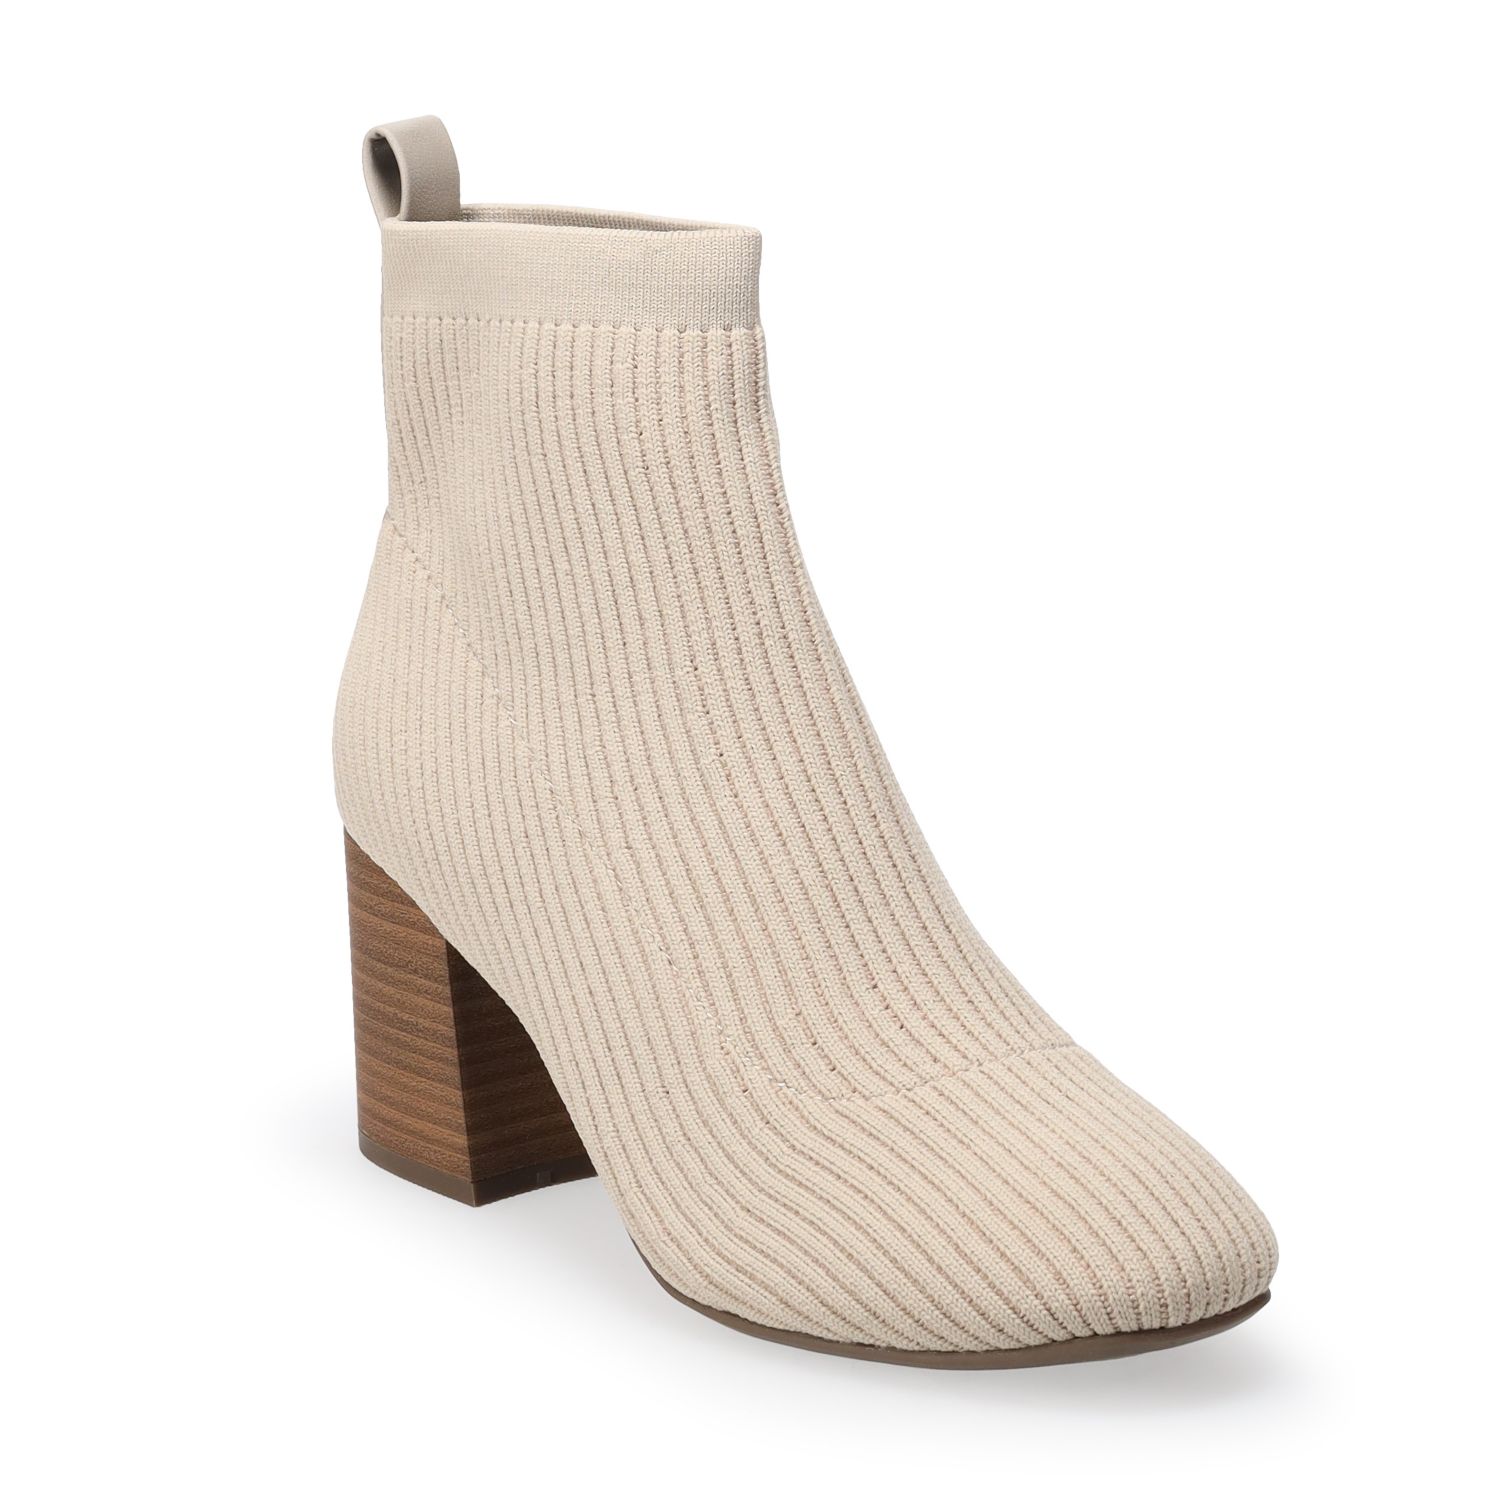 Image for LC Lauren Conrad Lithops Women's Knit Ankle Boots at Kohl's.